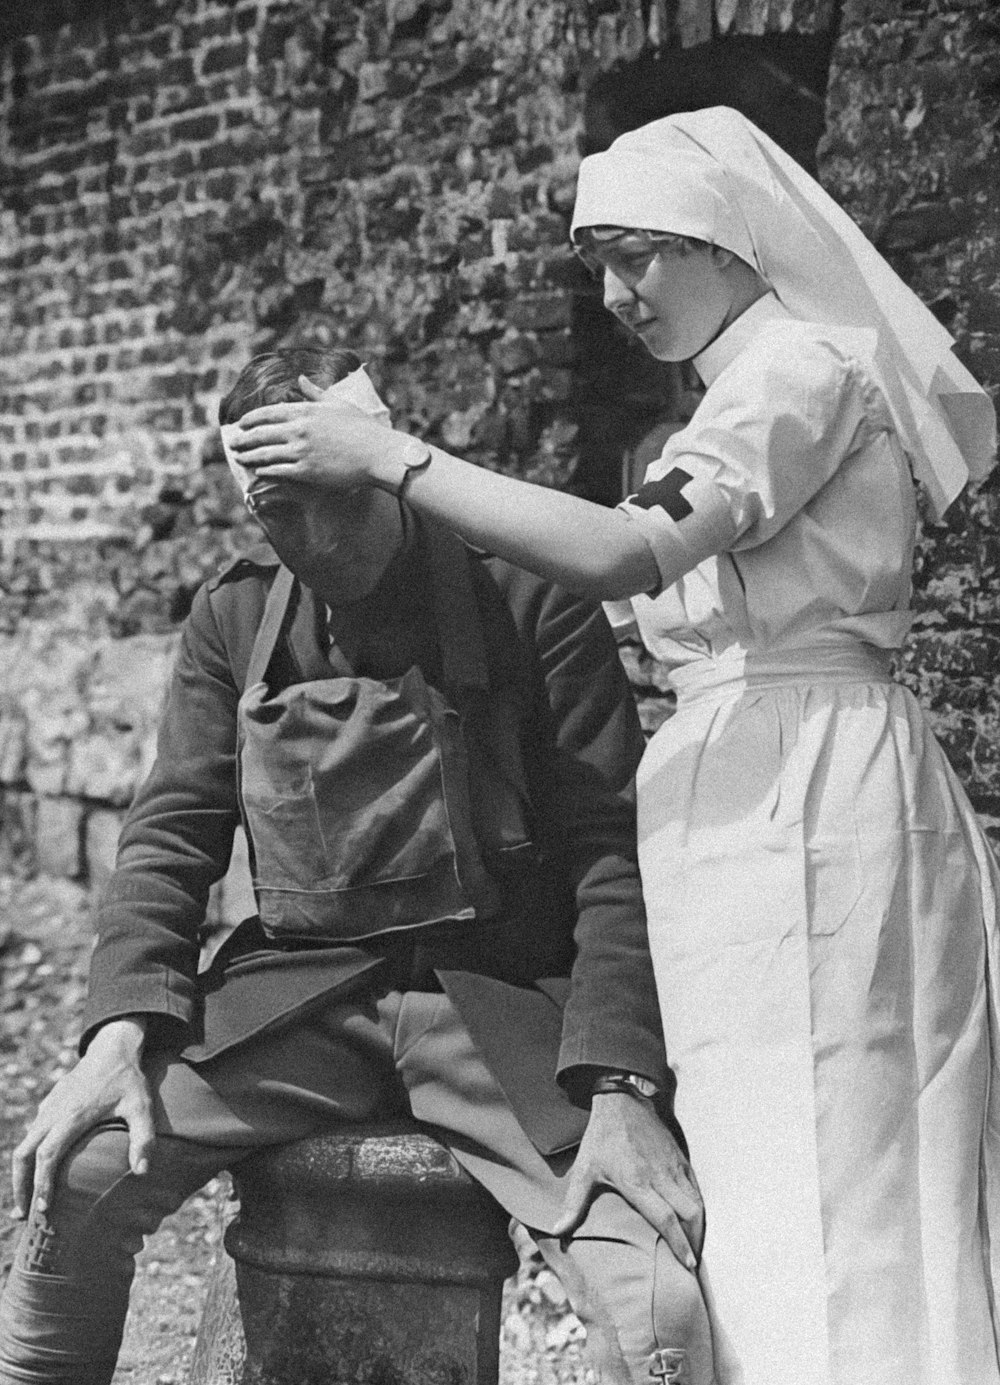 an old photo of a woman combing a man's hair